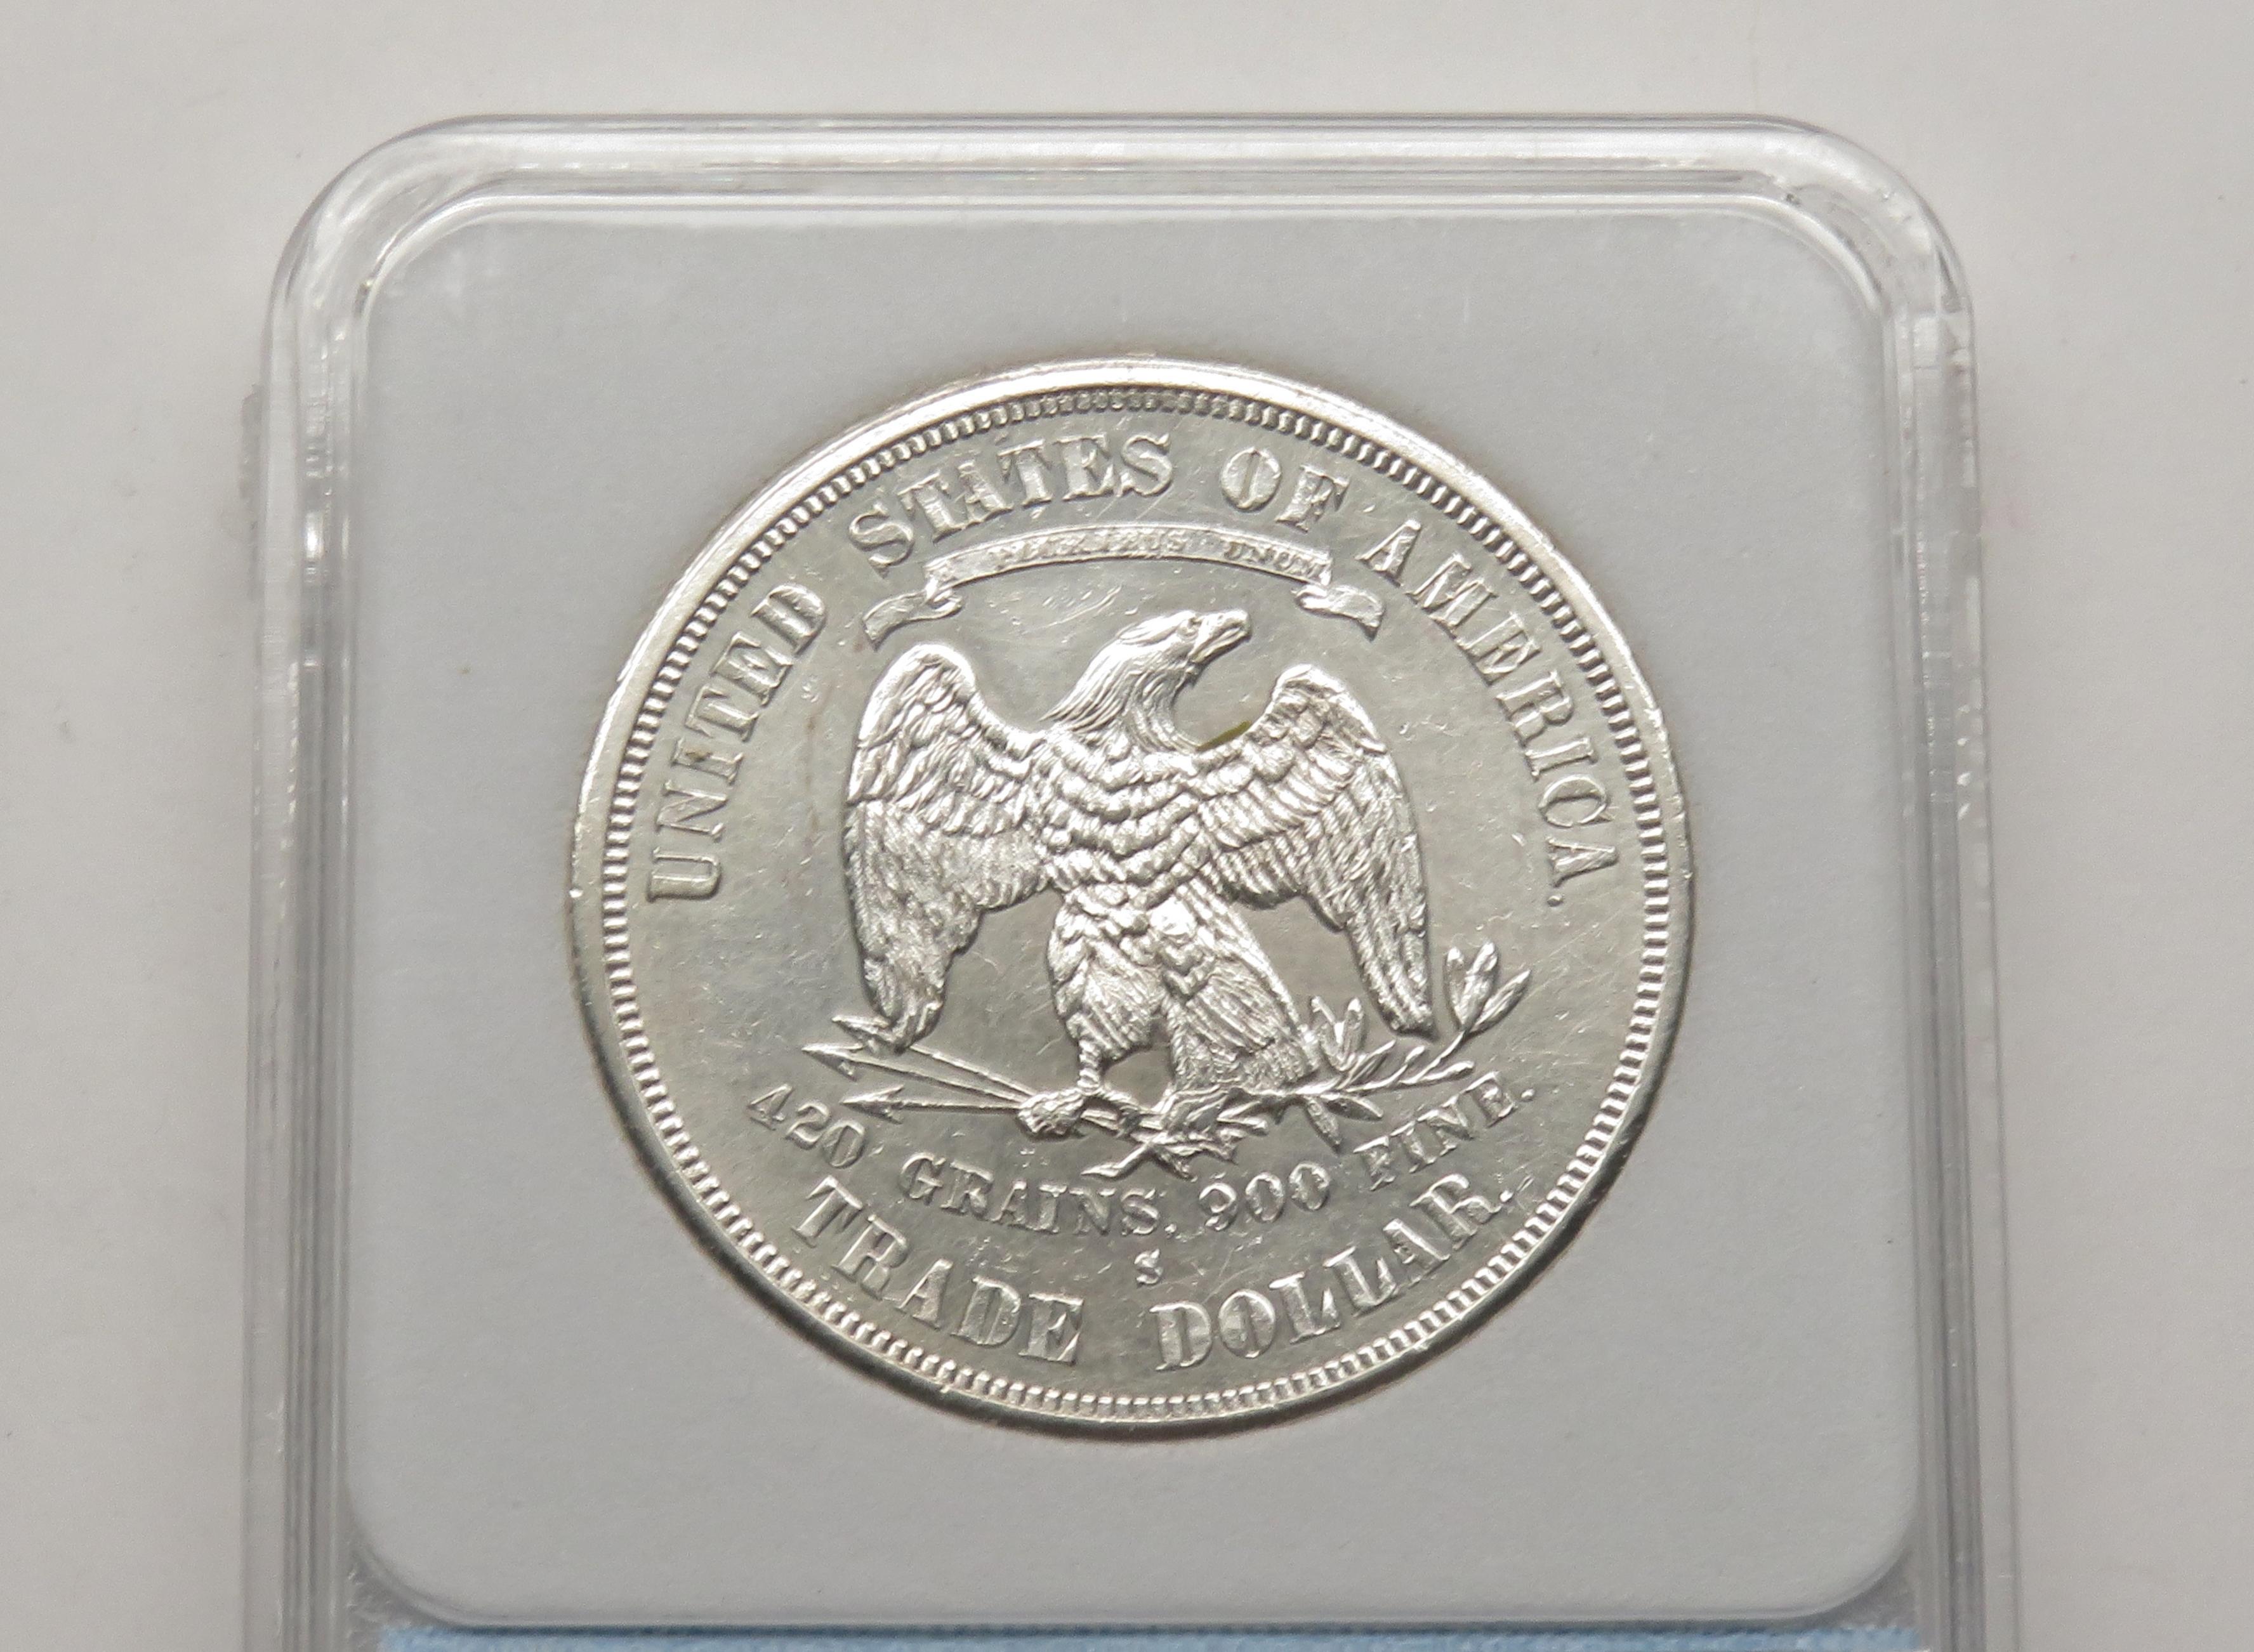 Trade $ 1875S NNC MS60, multiple fine lines ?die polish